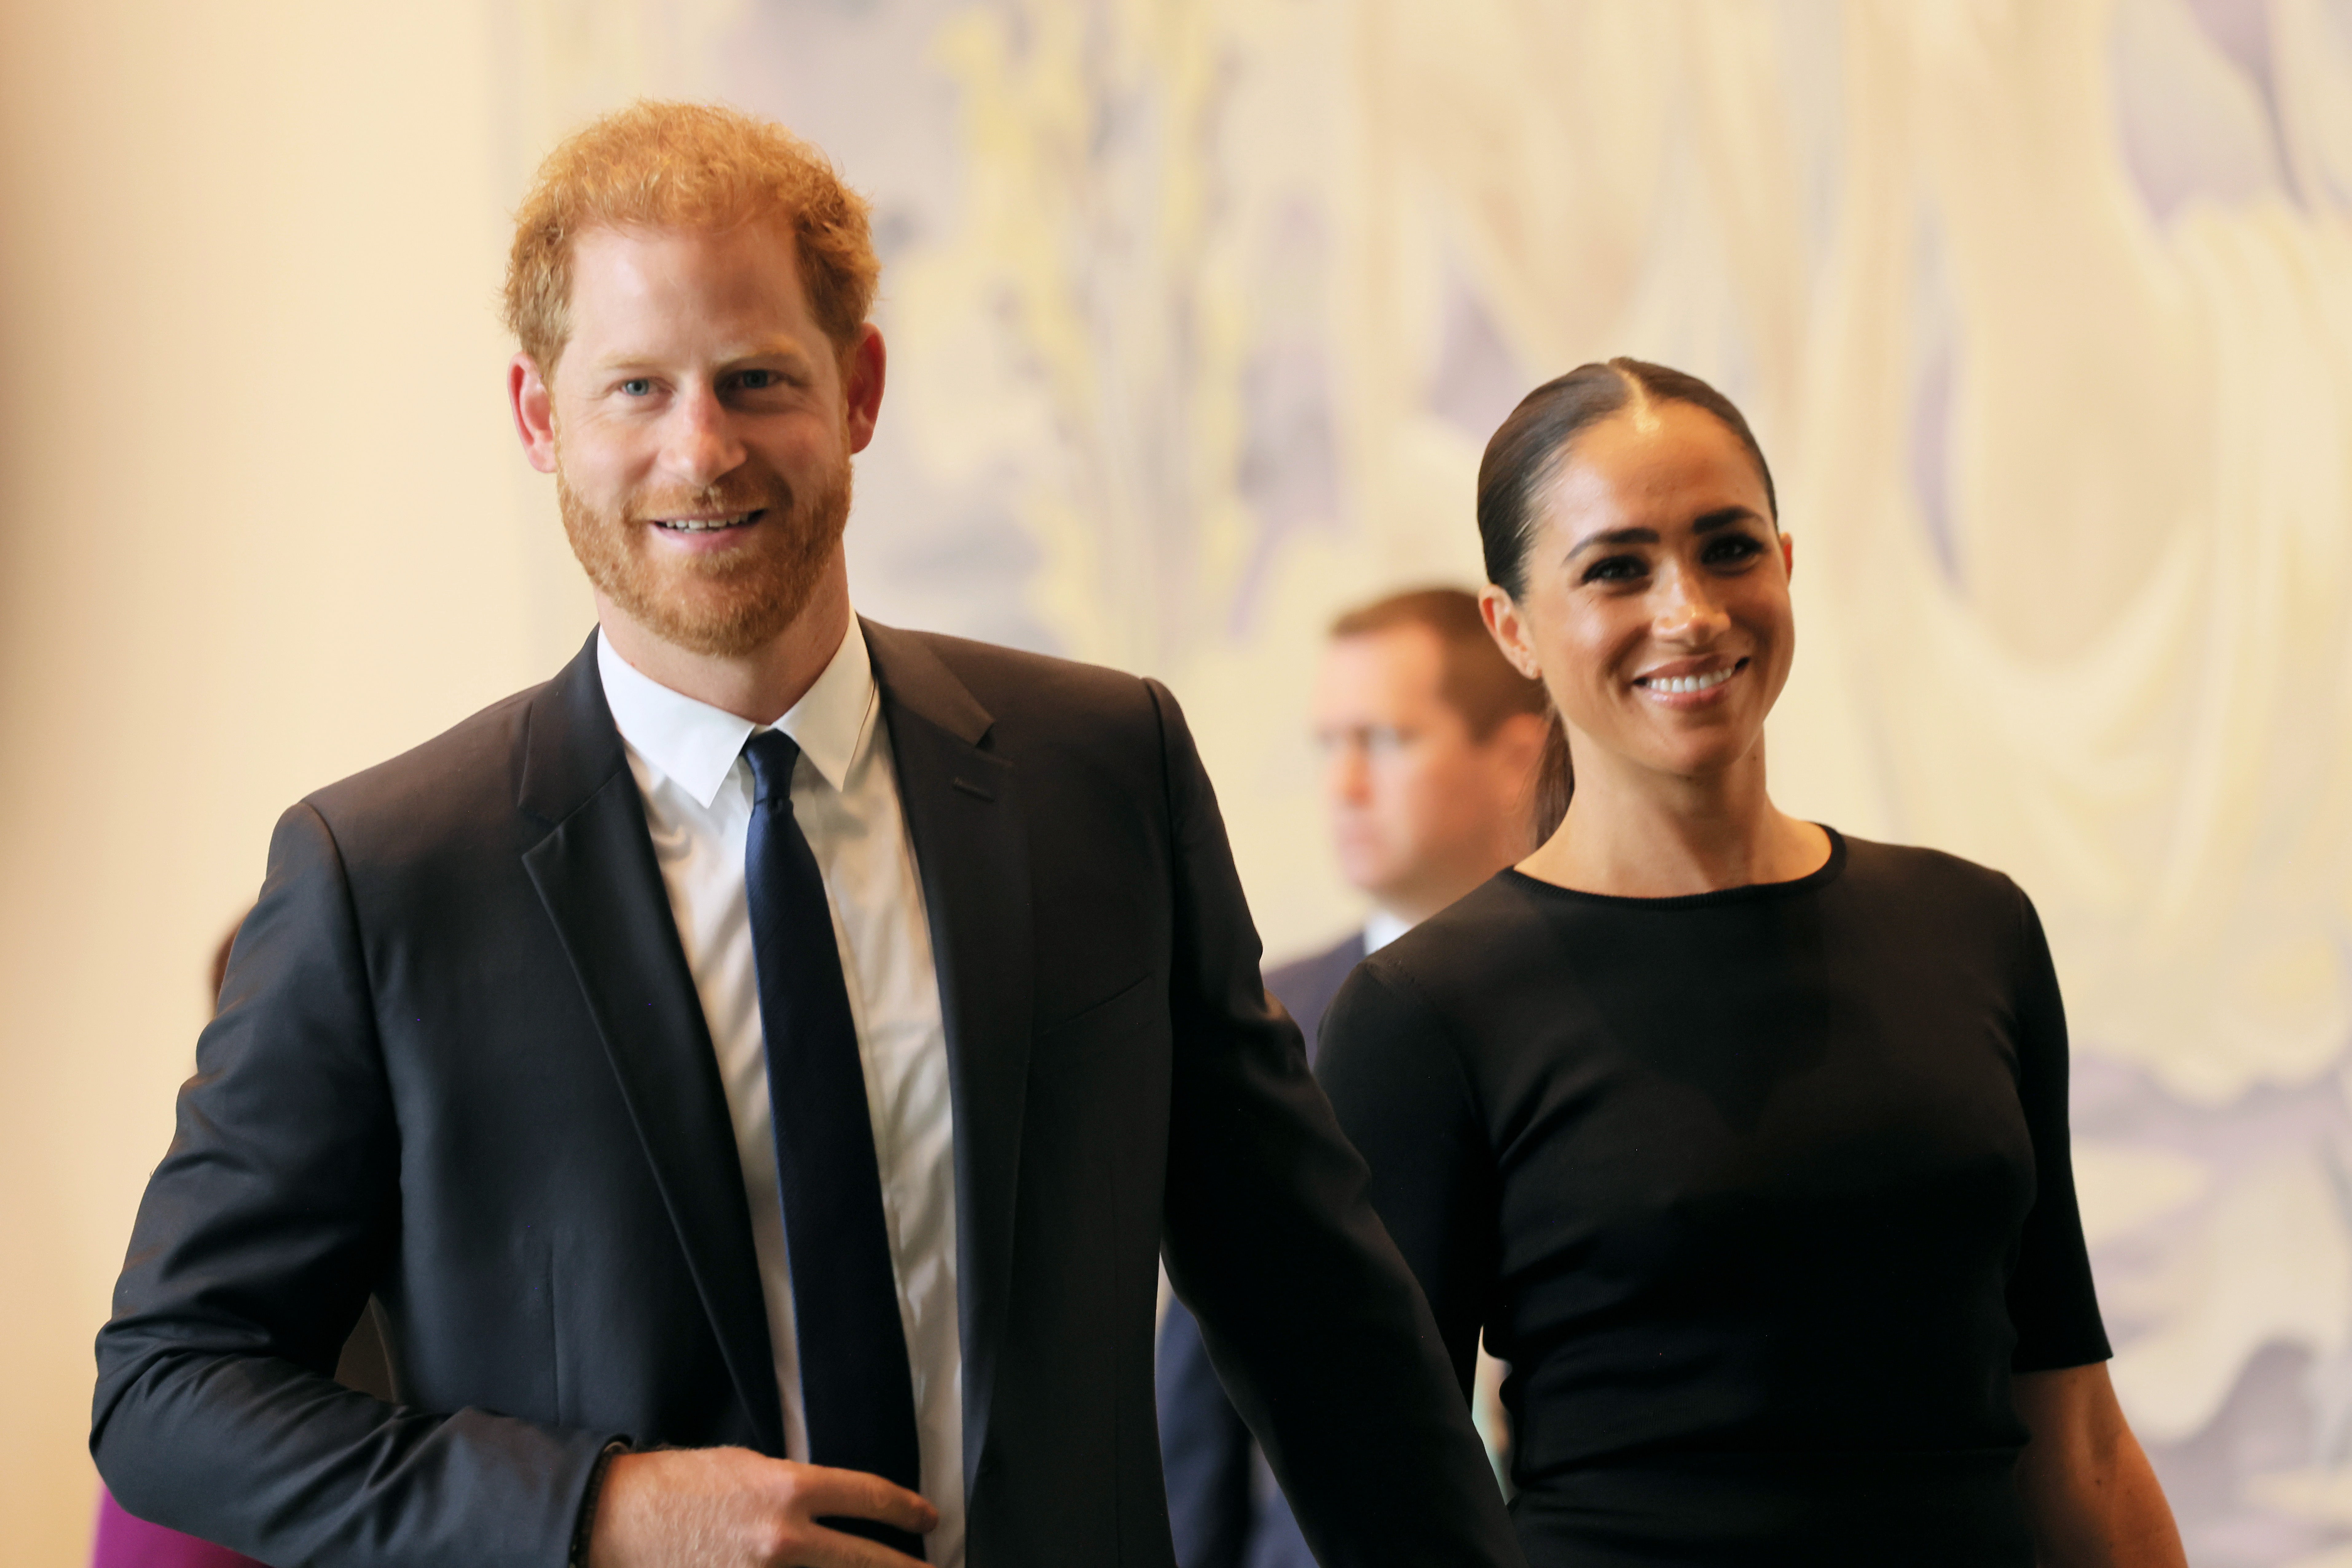 Meghan will not attend the coronation in May